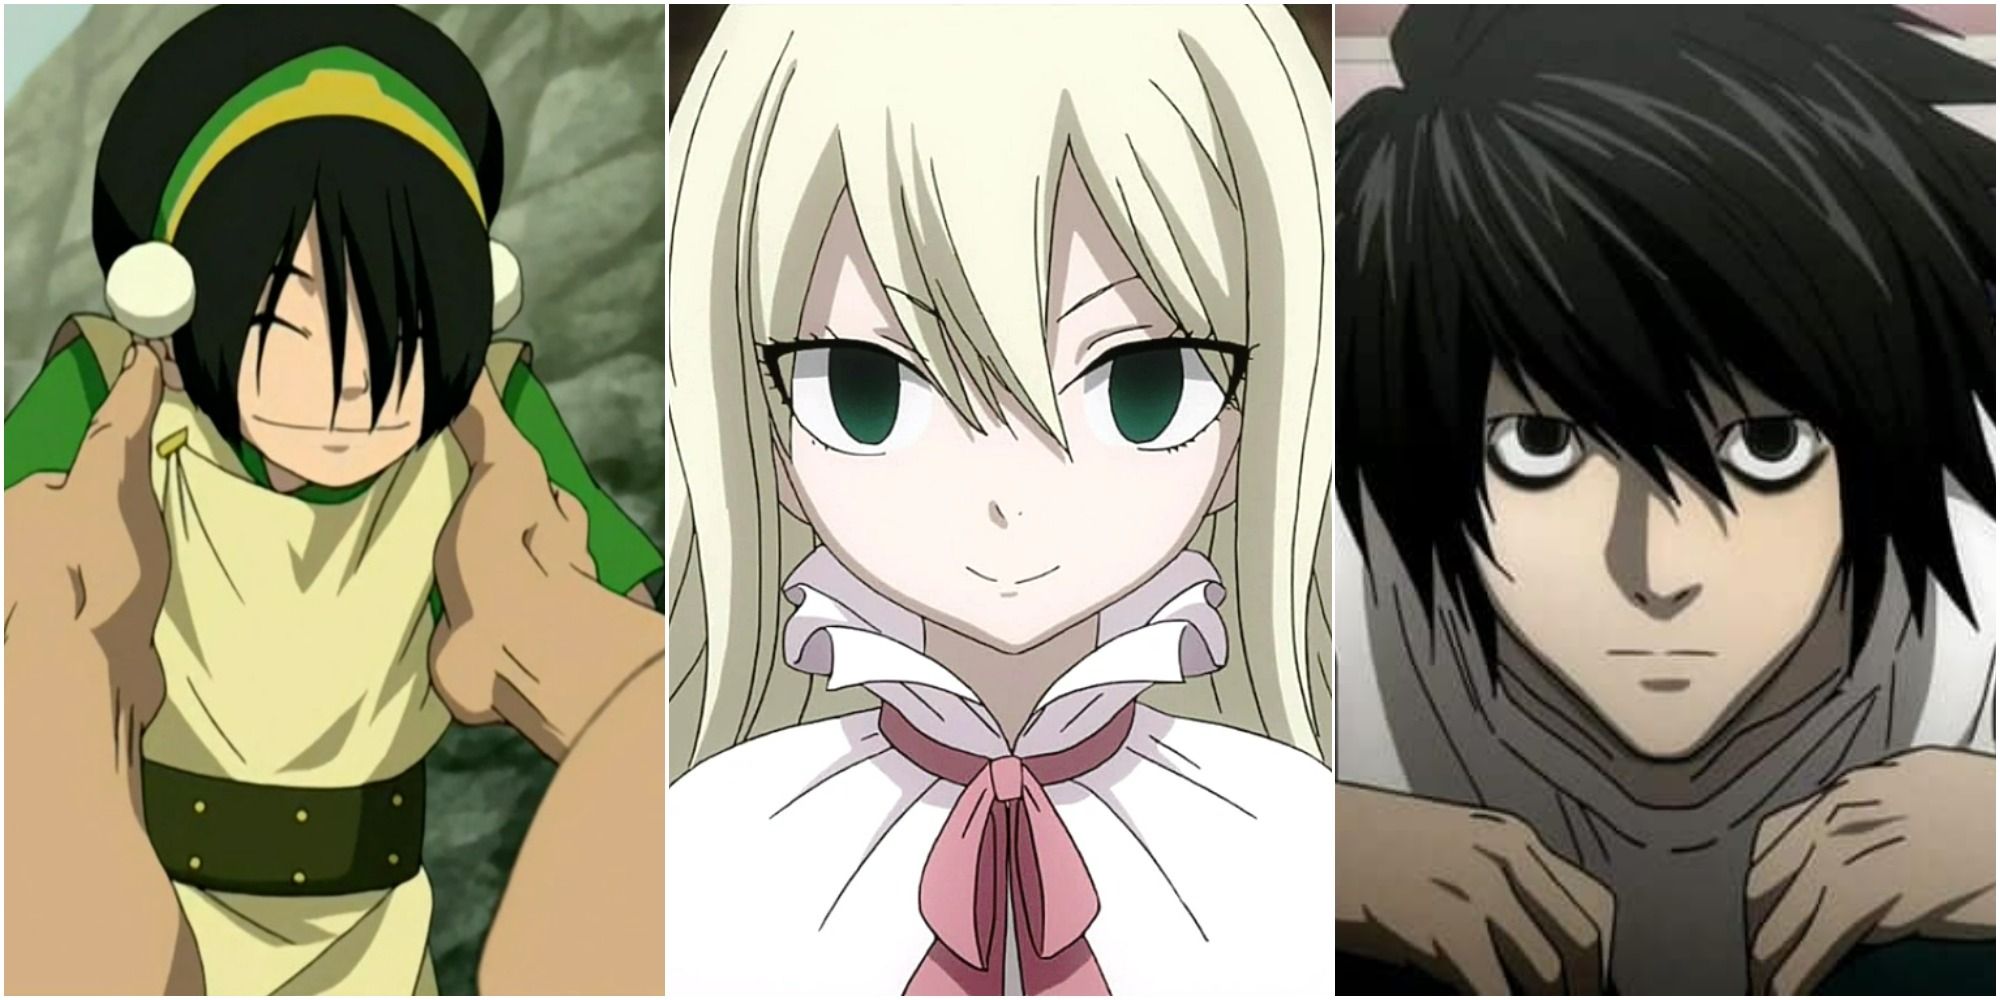 Anime Girl Hairstyles 25 Looks to Copy in Real Life